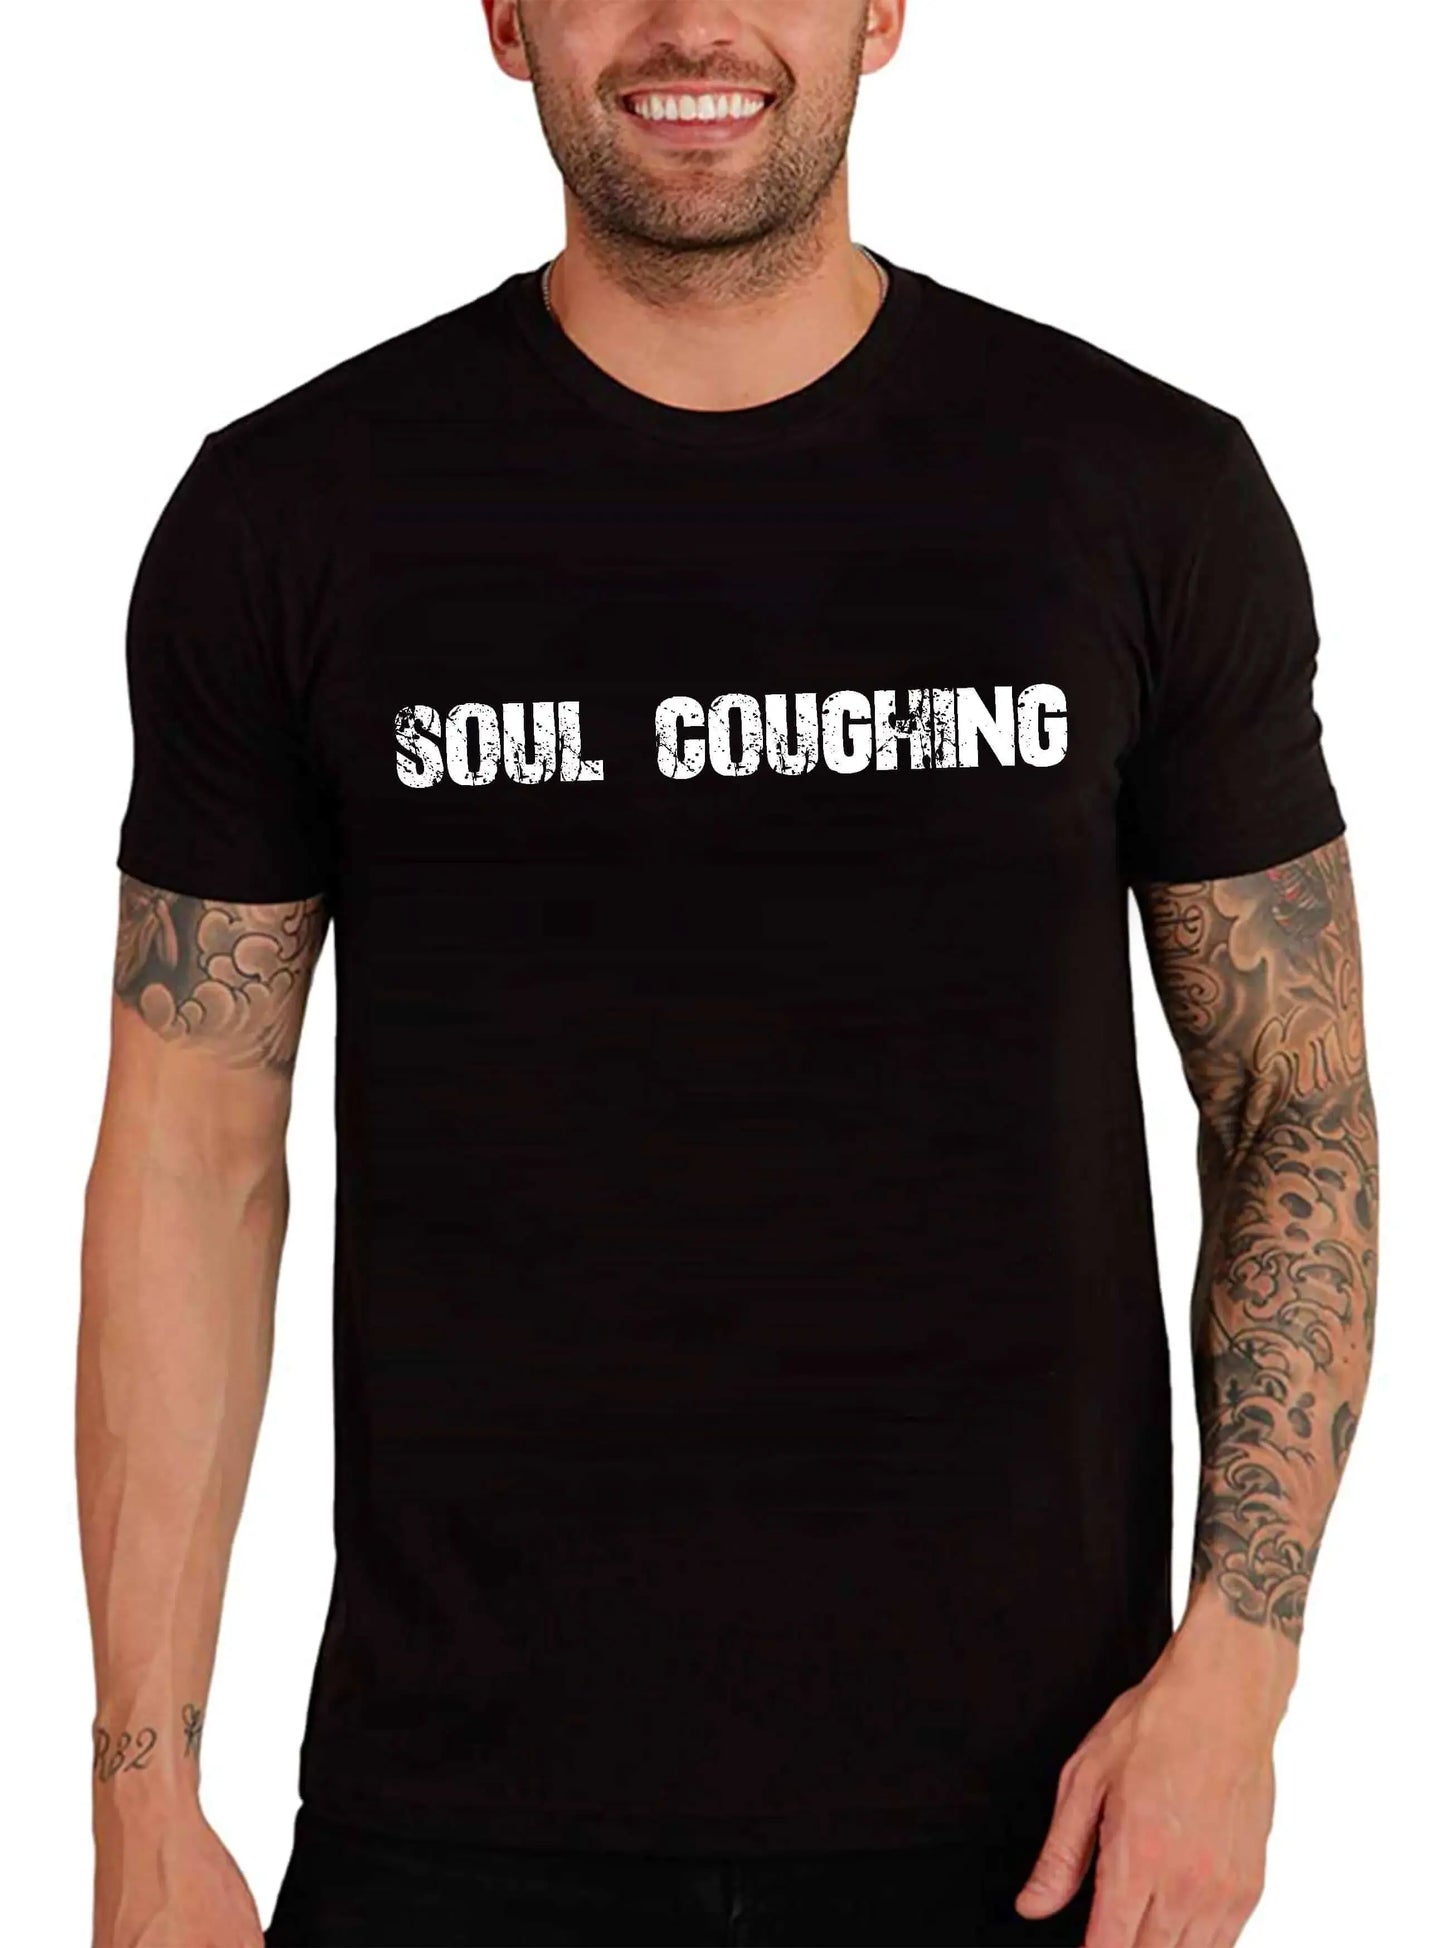 Men's Graphic T-Shirt Soul Coughing Eco-Friendly Limited Edition Short Sleeve Tee-Shirt Vintage Birthday Gift Novelty